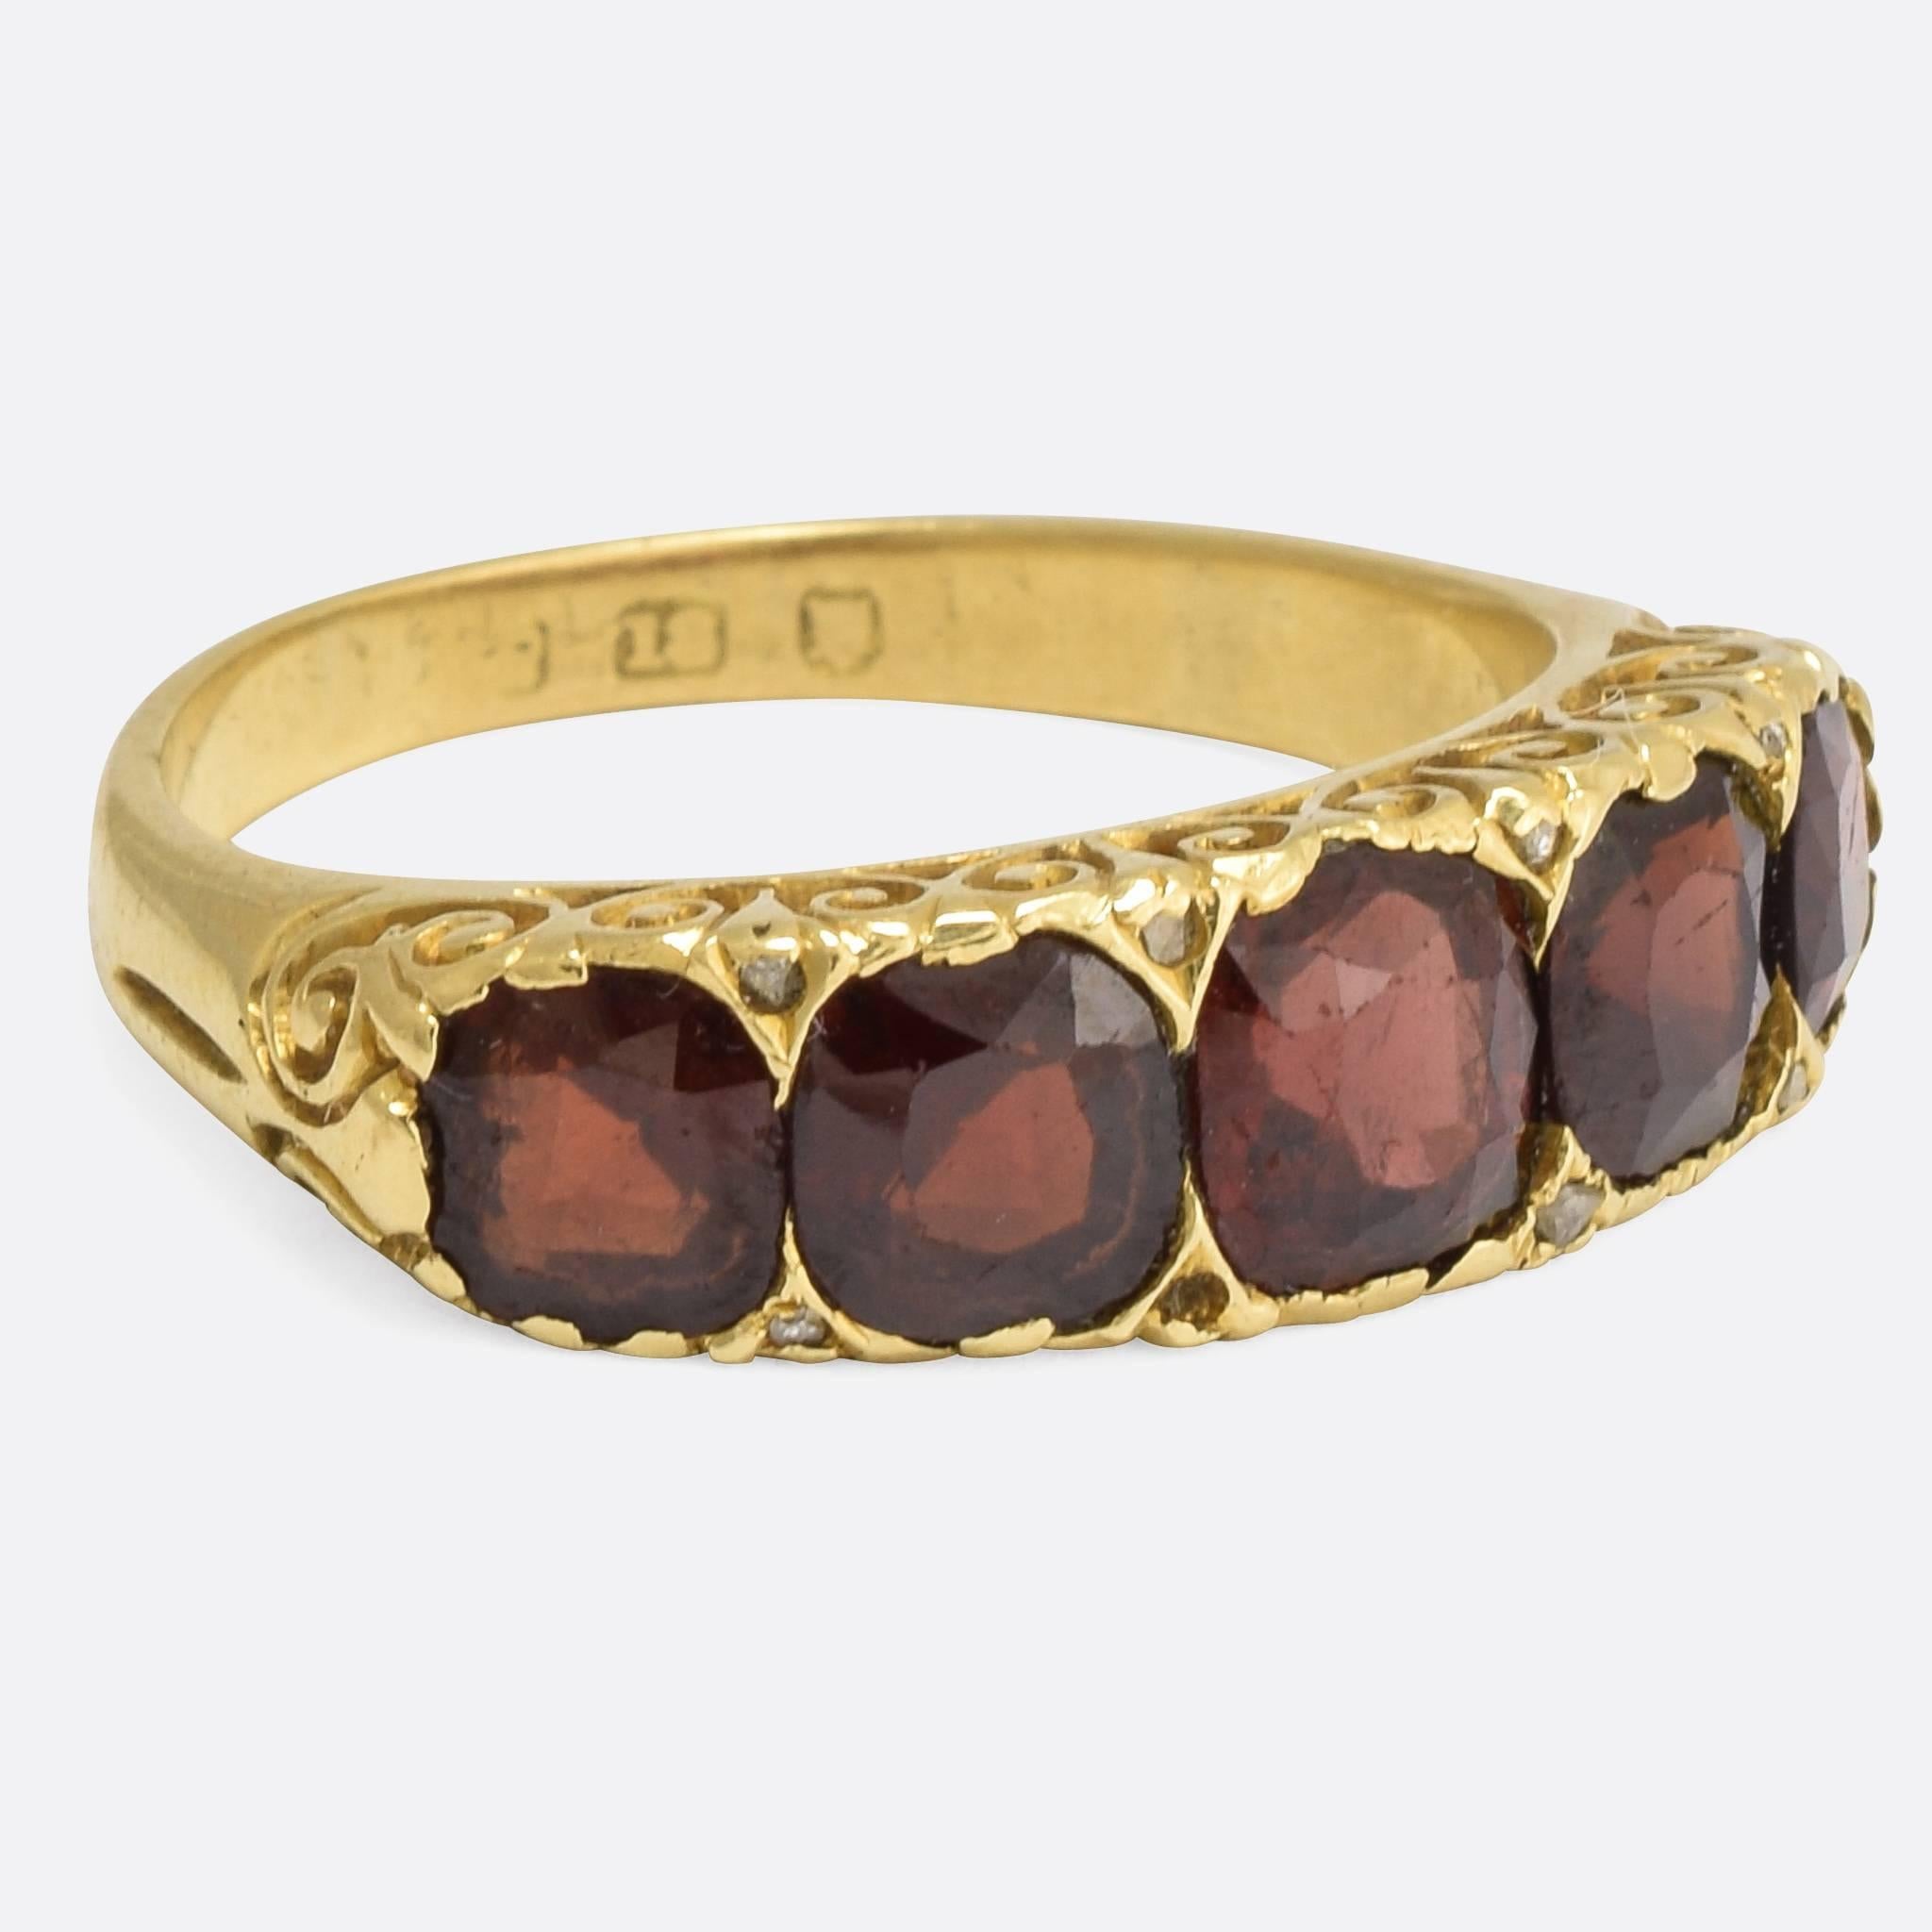 A cool oversized mid-Victorian 5-stone ring, set with five blood red garnets and tiny rose cut diamond accents. The gallery features deeply scrolled detailing that continues around the shoulders, and the mount is crafted from 18k gold throughout.